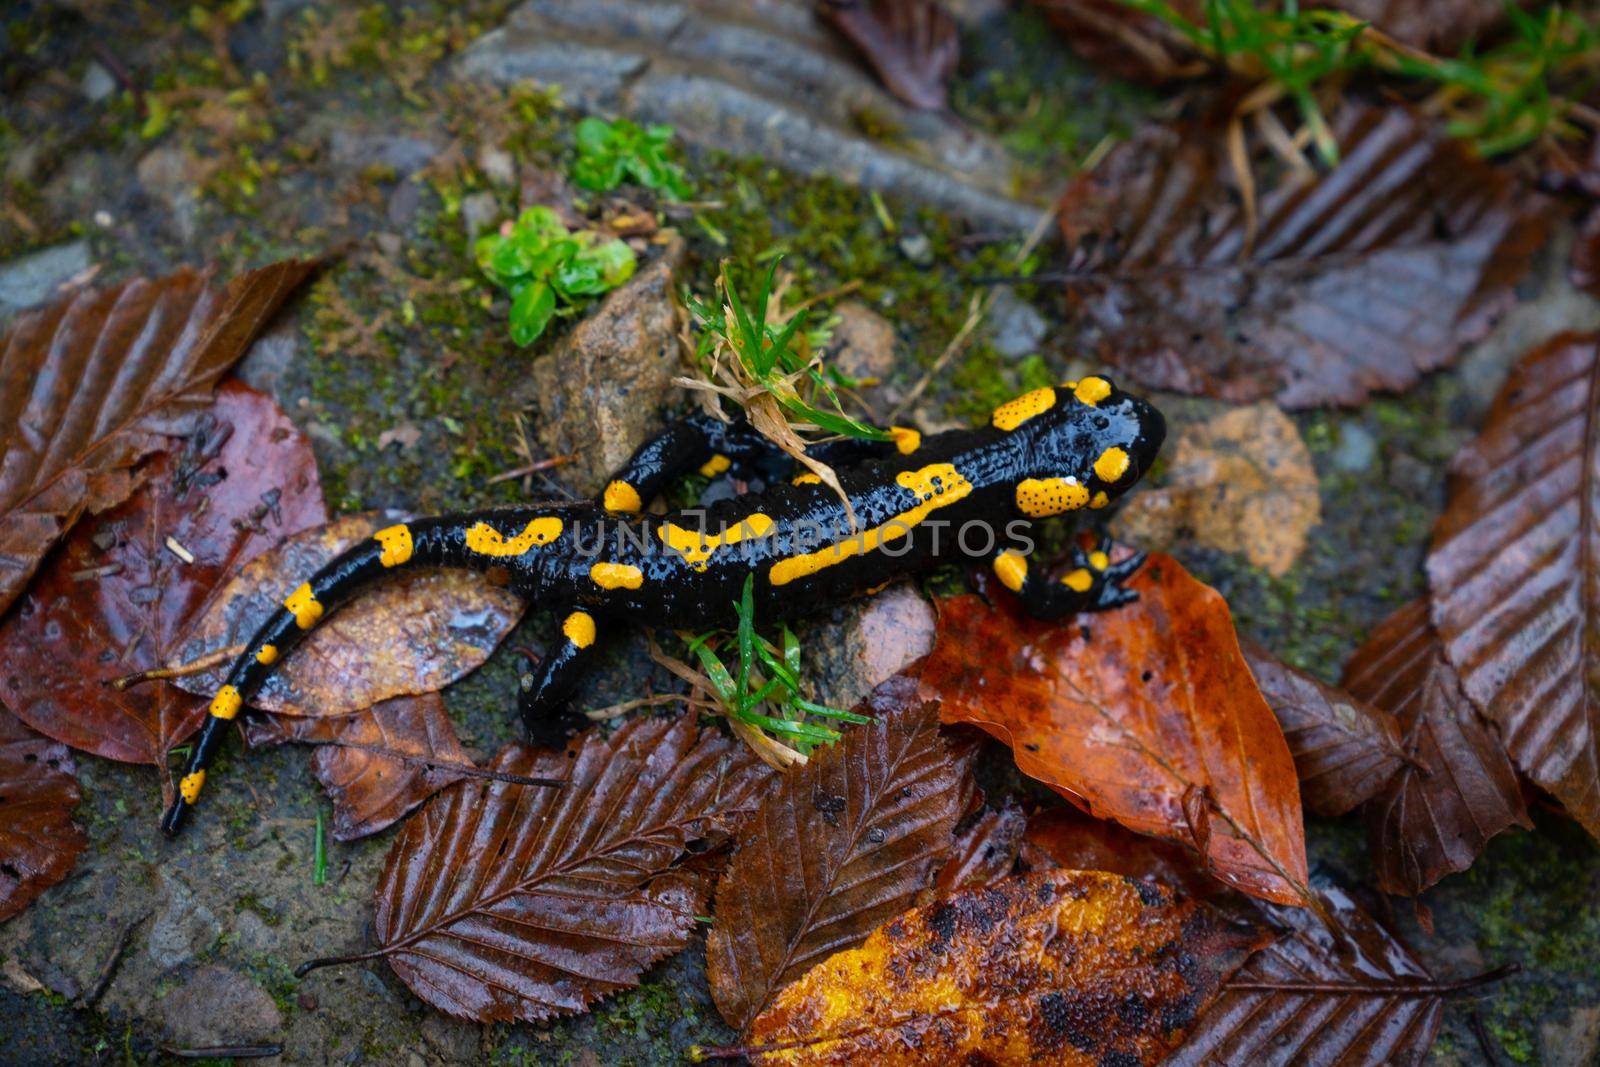 fire salamander or Salamandra salamandra the best-known salamander species in Europe. Close up portrait with shallow DOF and foliage leaves in the wild. Wildlife photography